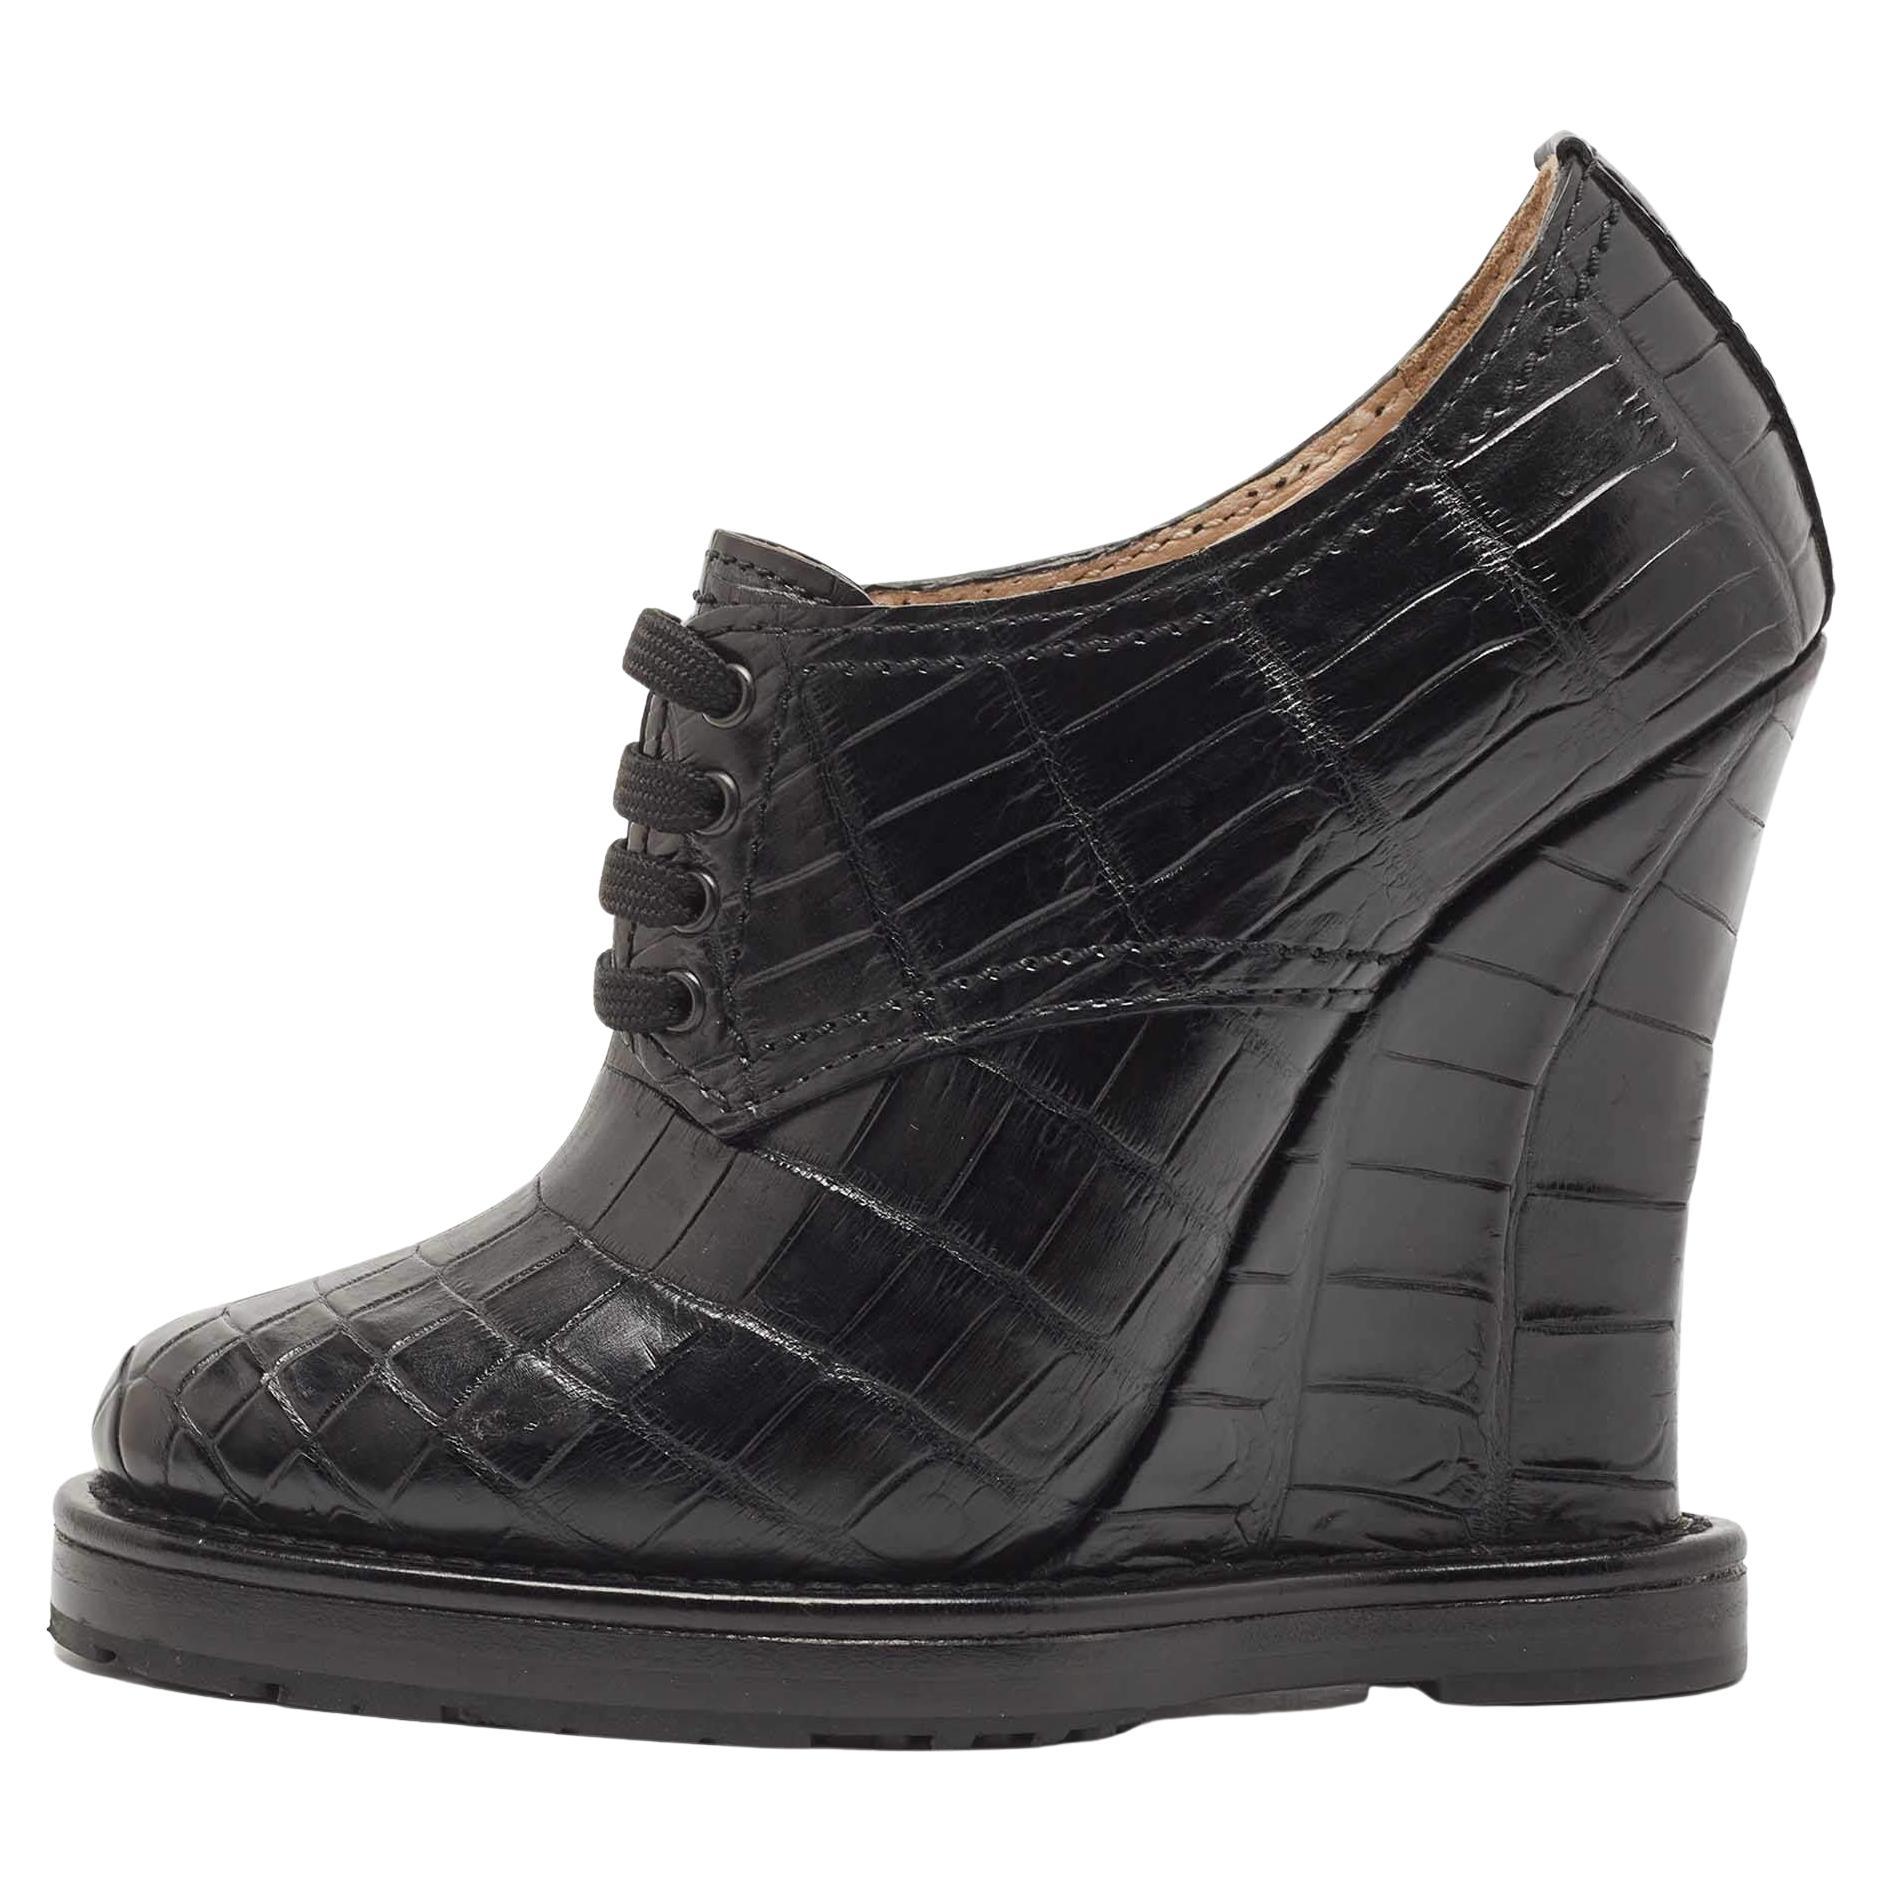 At Auction: Louis Vuitton Stretch Fabric Silhouette Stripe Ankle Boots  Black 36.5 US 6 Shoes